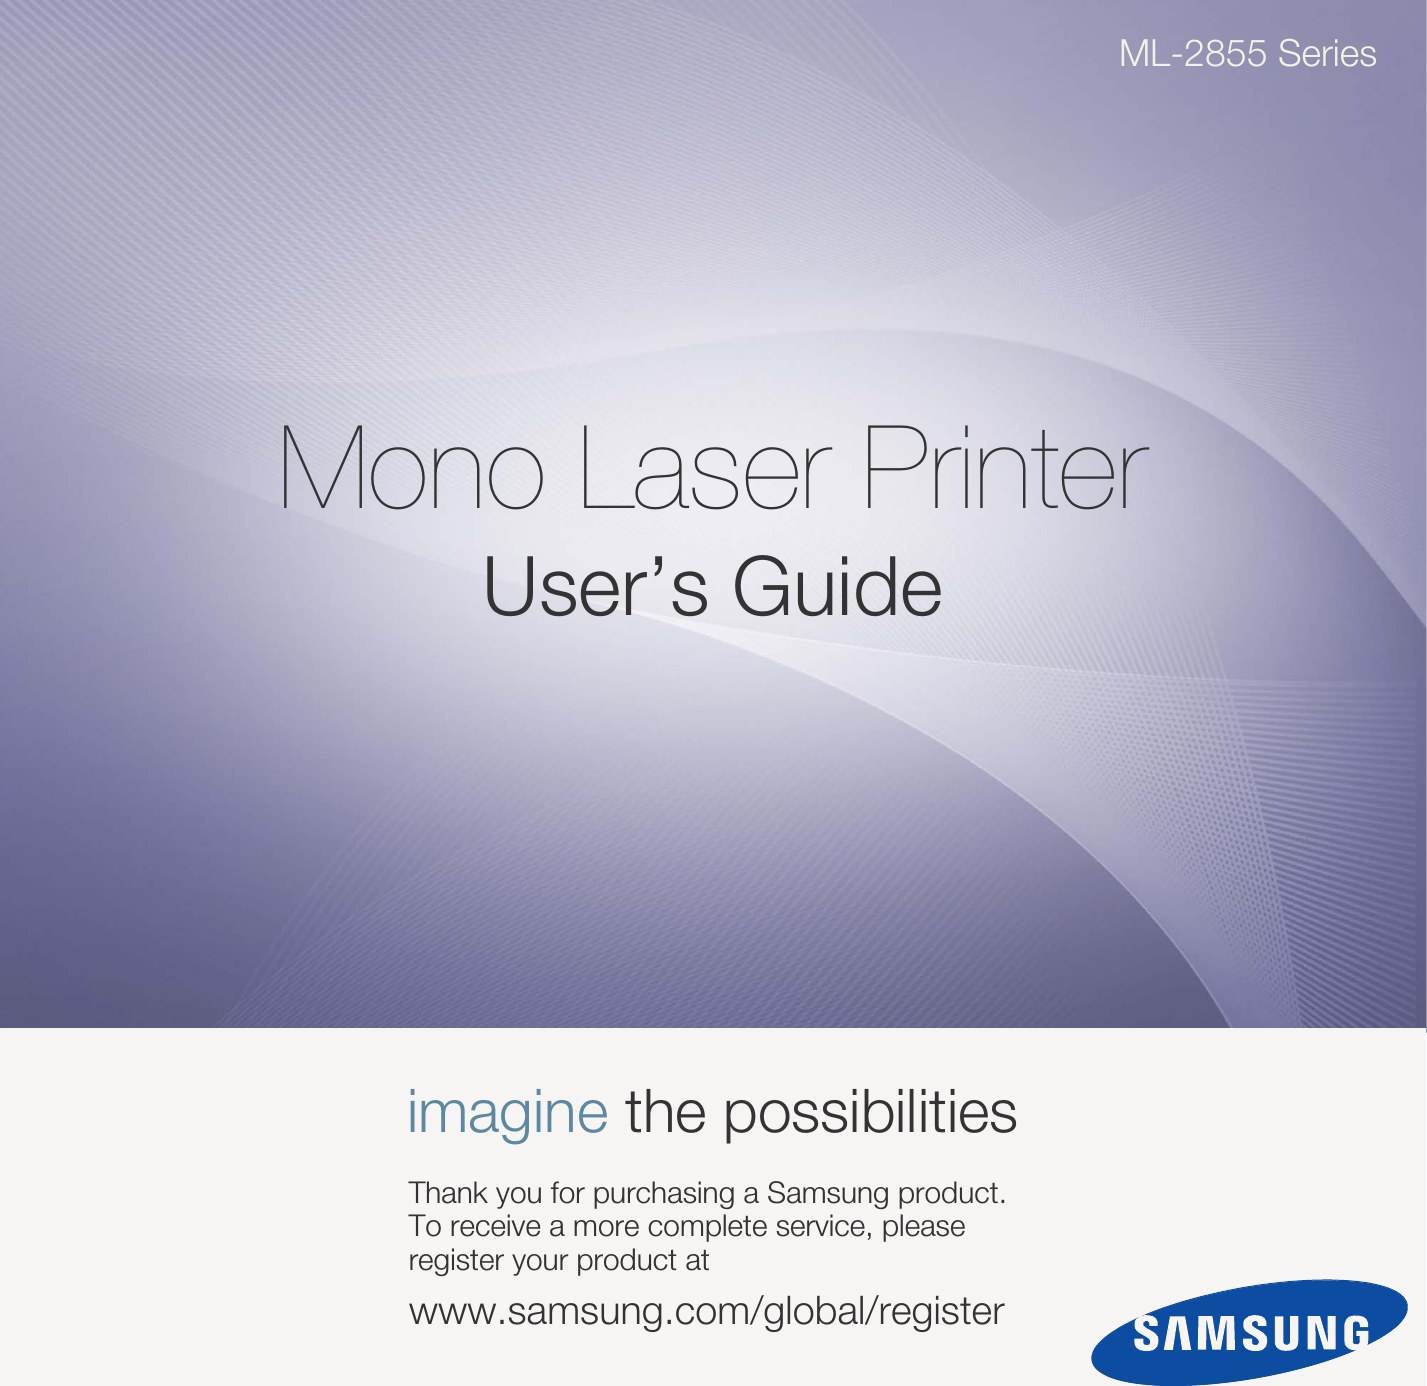 ML-2855 SeriesMono Laser PrinterUser’s Guideimagine the possibilitiesThank you for purchasing a Samsung product. To receive a more complete service, please register your product atwww.samsung.com/global/register